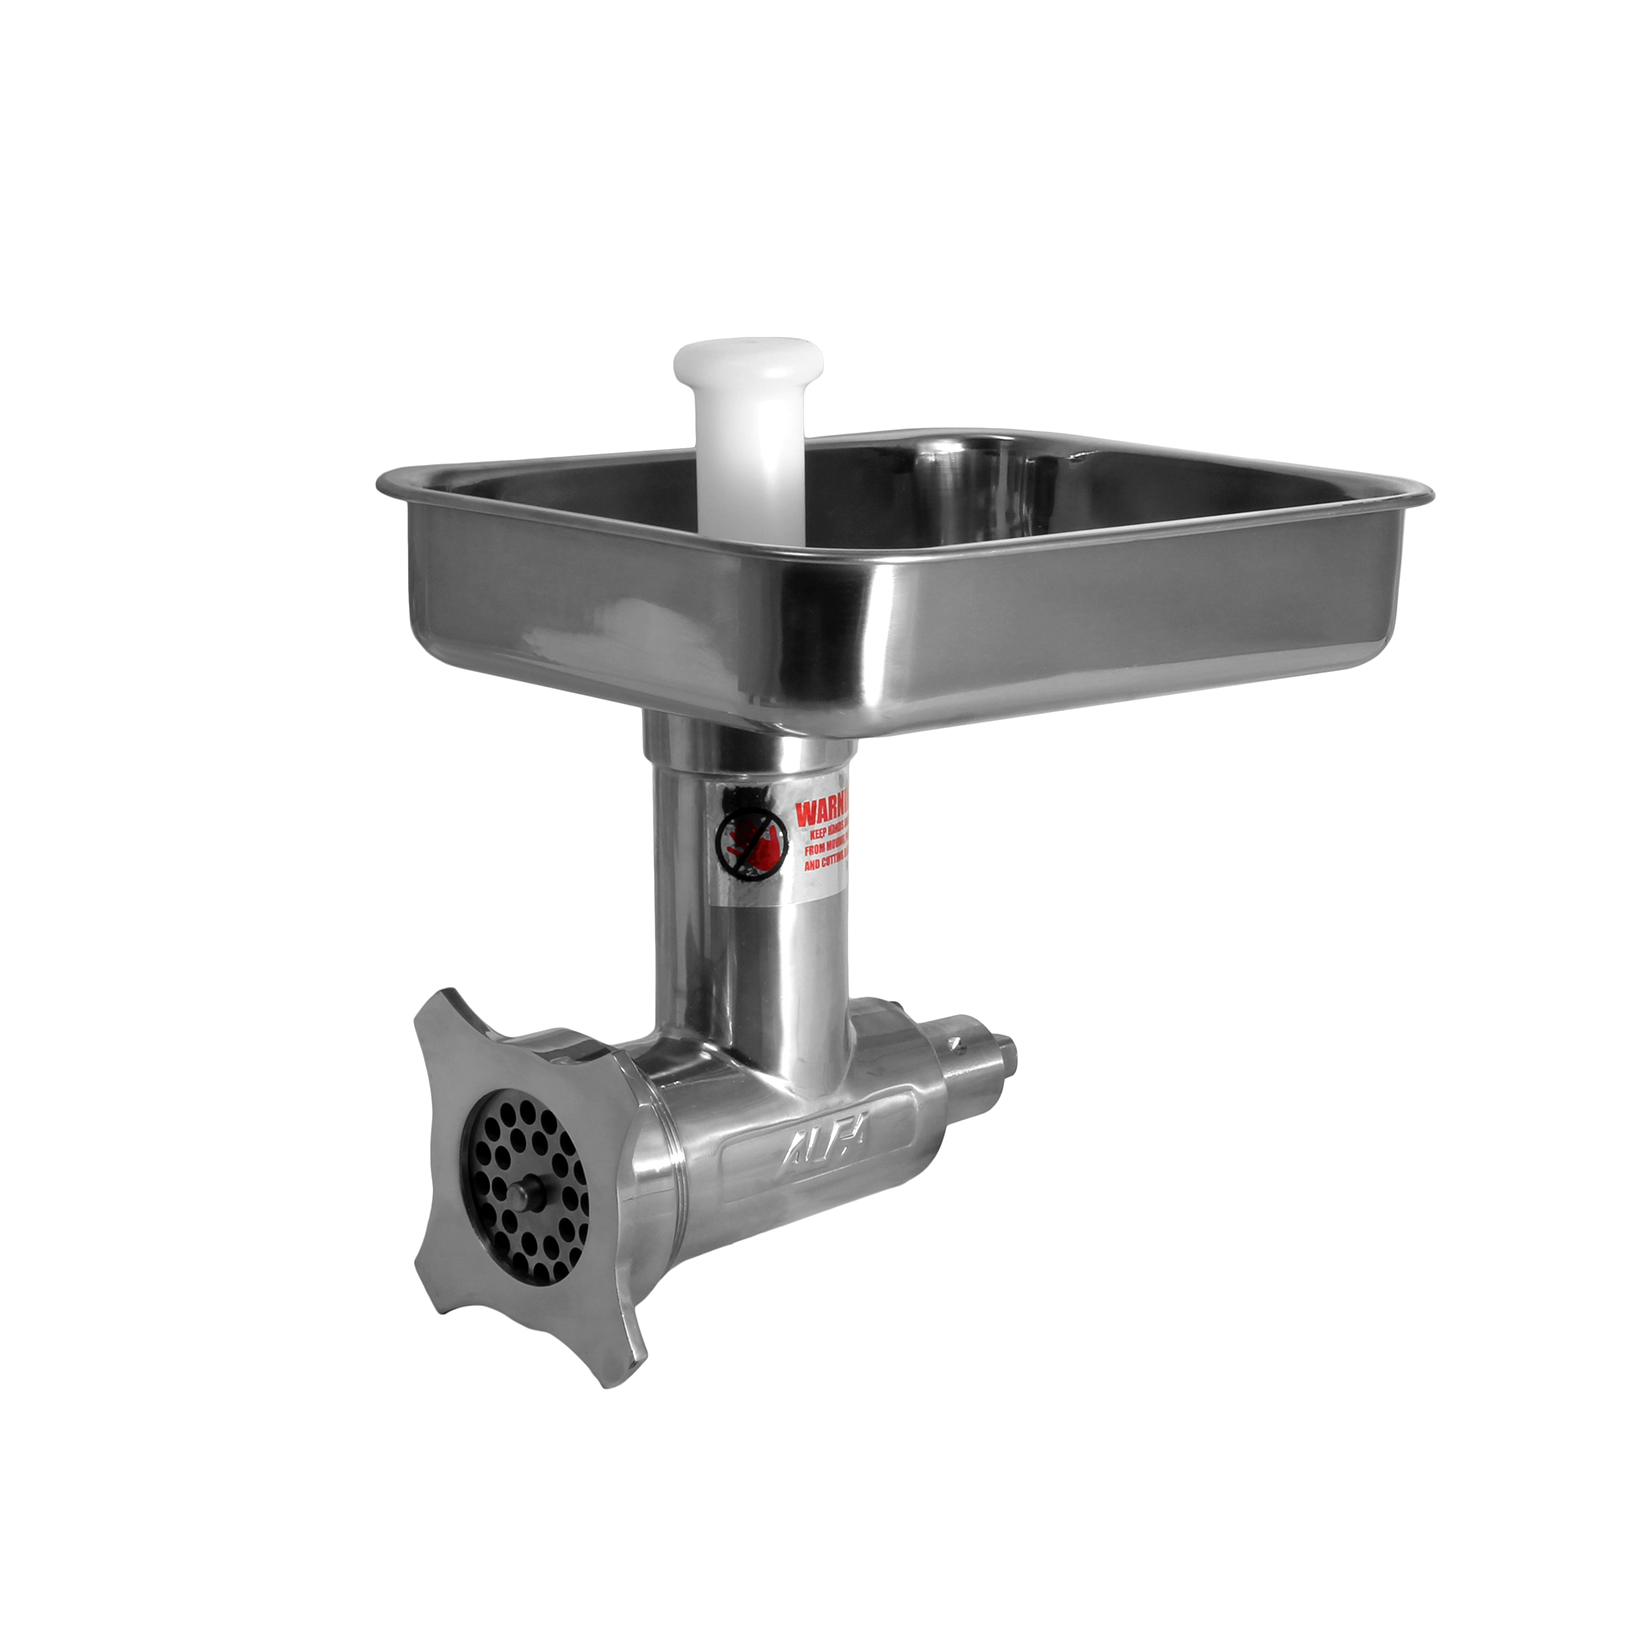 ALFA 12 SS CCA Stainless Meat Chopper/Grinder Attachment